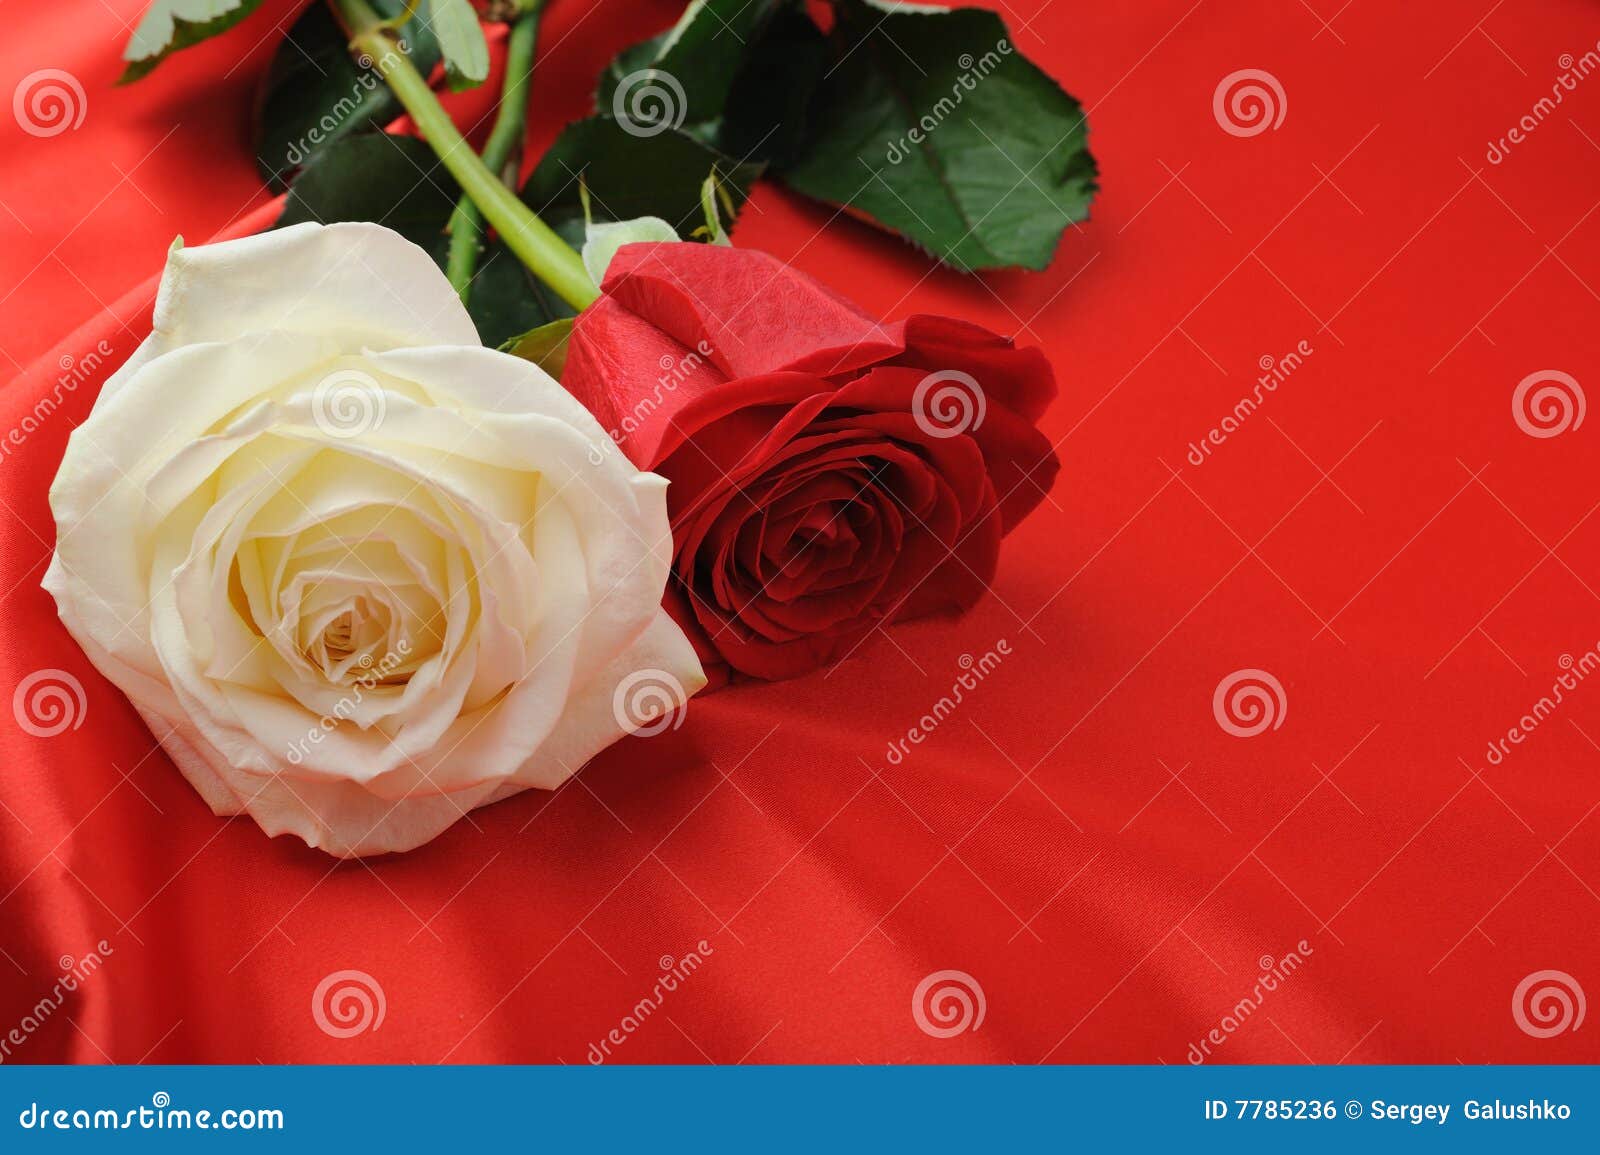 Two rose on satin stock photo. Image of curve, sheet, beauty - 7785236